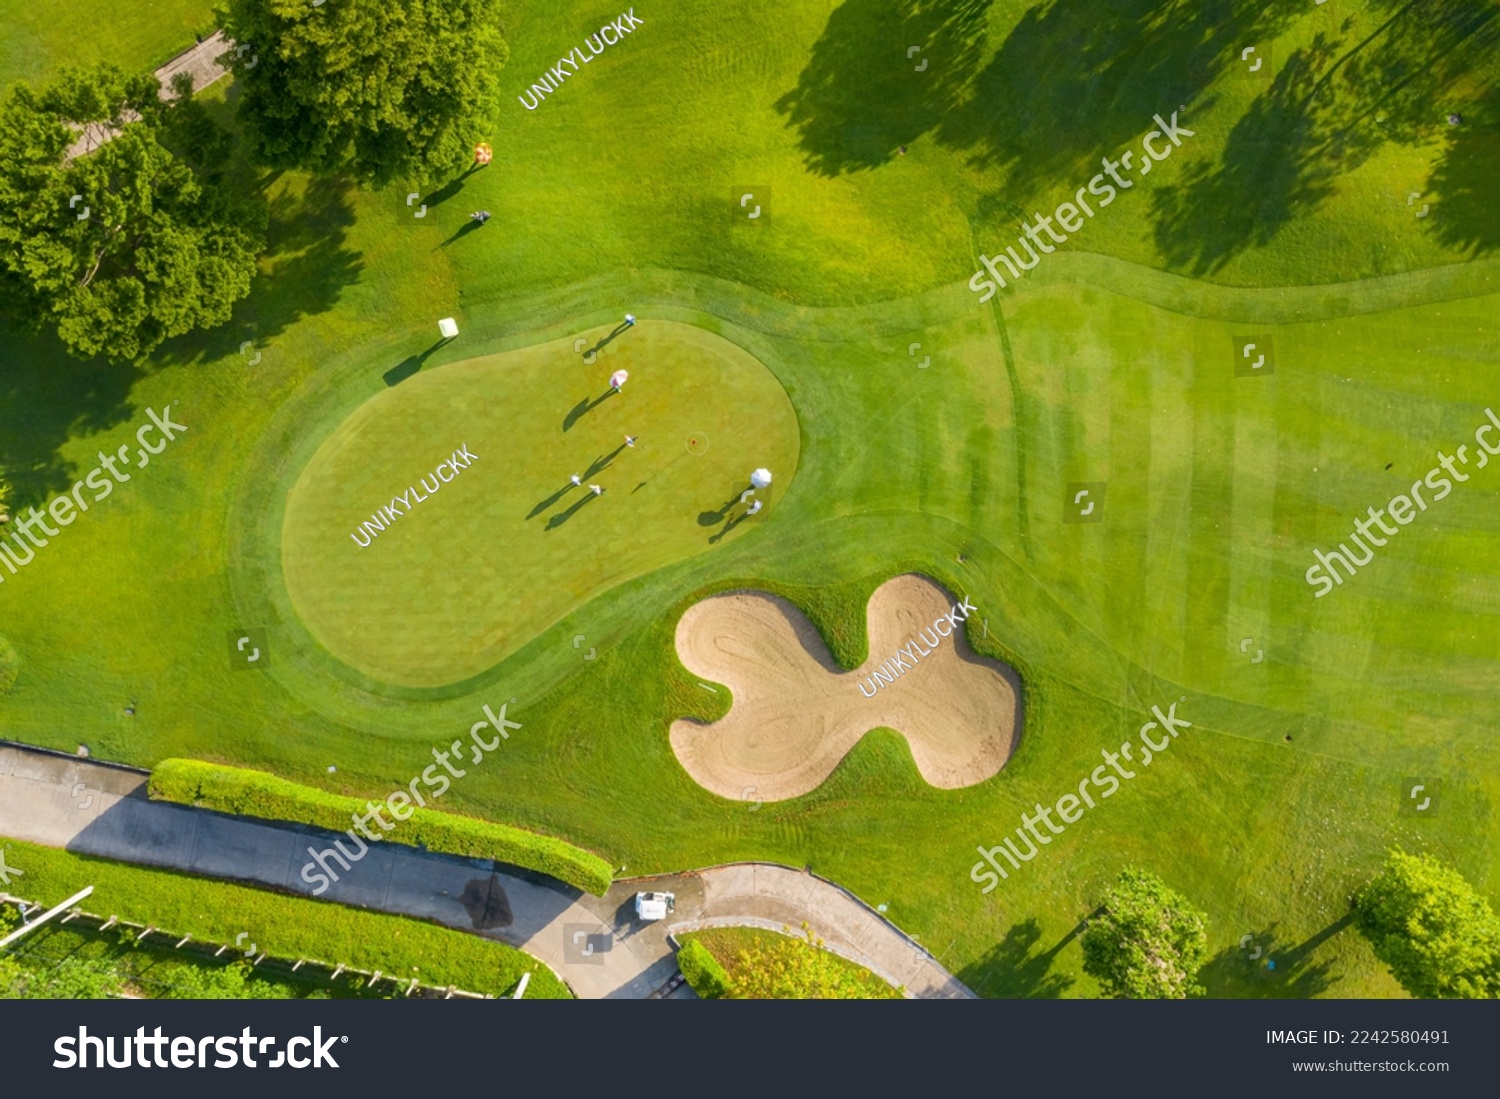 Golf course sport, green grass and trees on a golf field, fairway and putting green top view, Bangkok Thailand. bird view over Golf course in the tropical asia. #2242580491